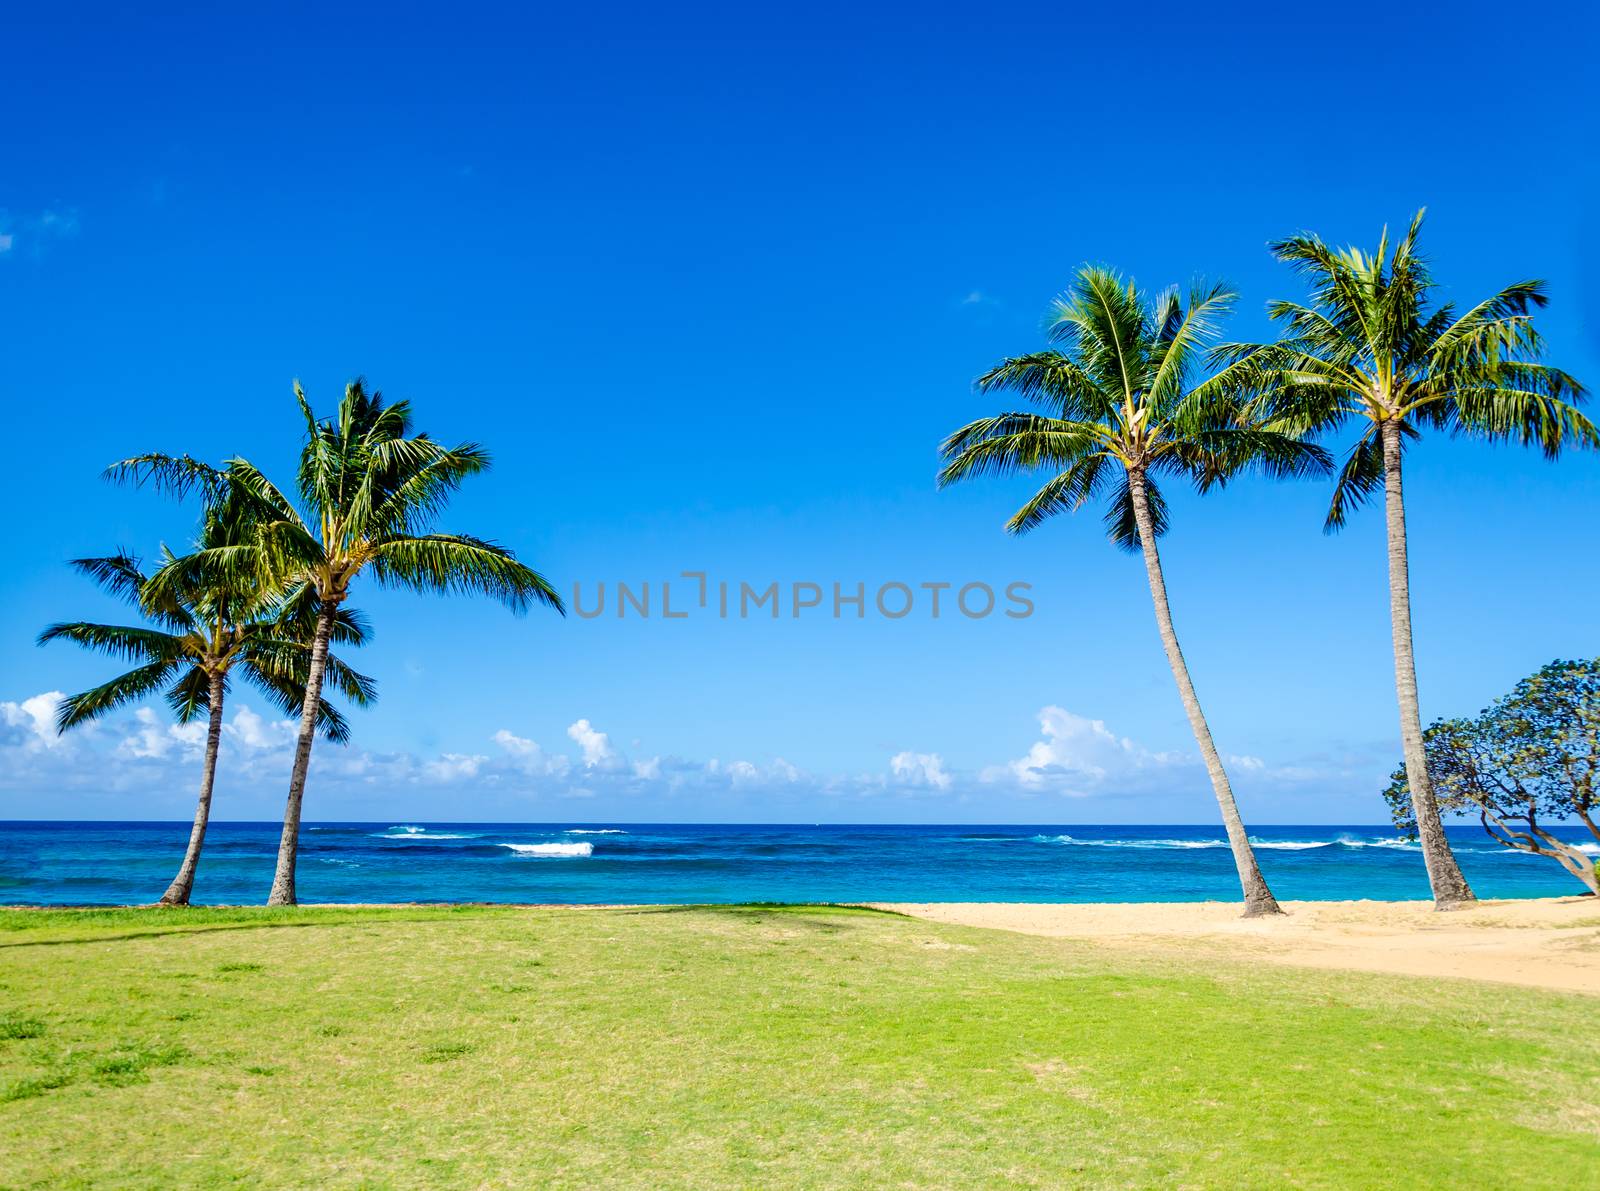 Cococnut Palm trees on the sandy Poipu beach in Hawaii by EllenSmile